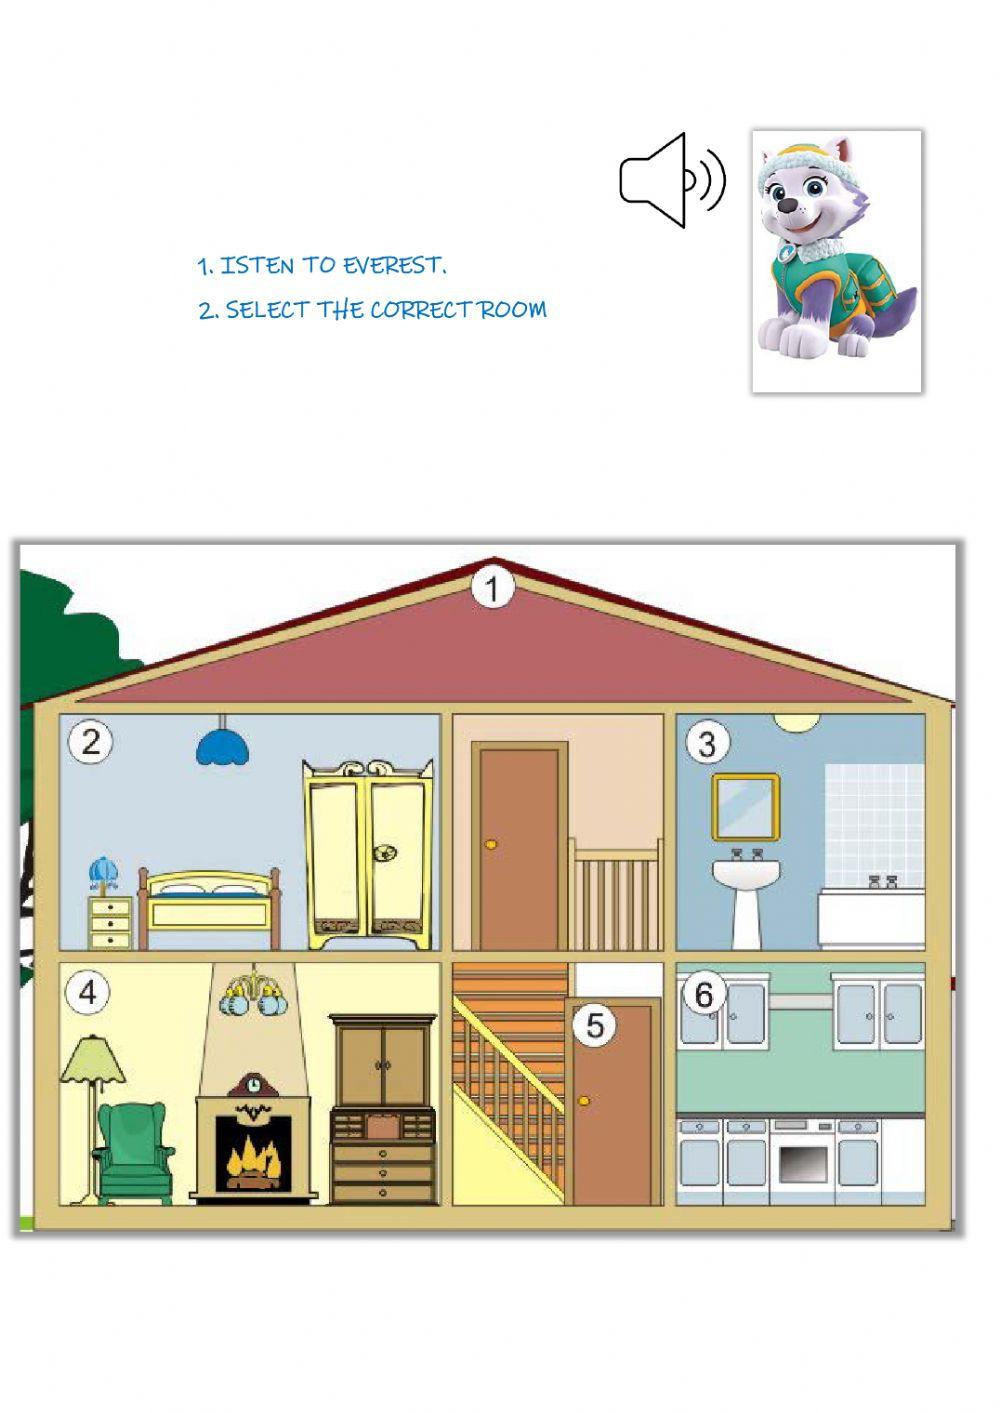 Parts of the house I